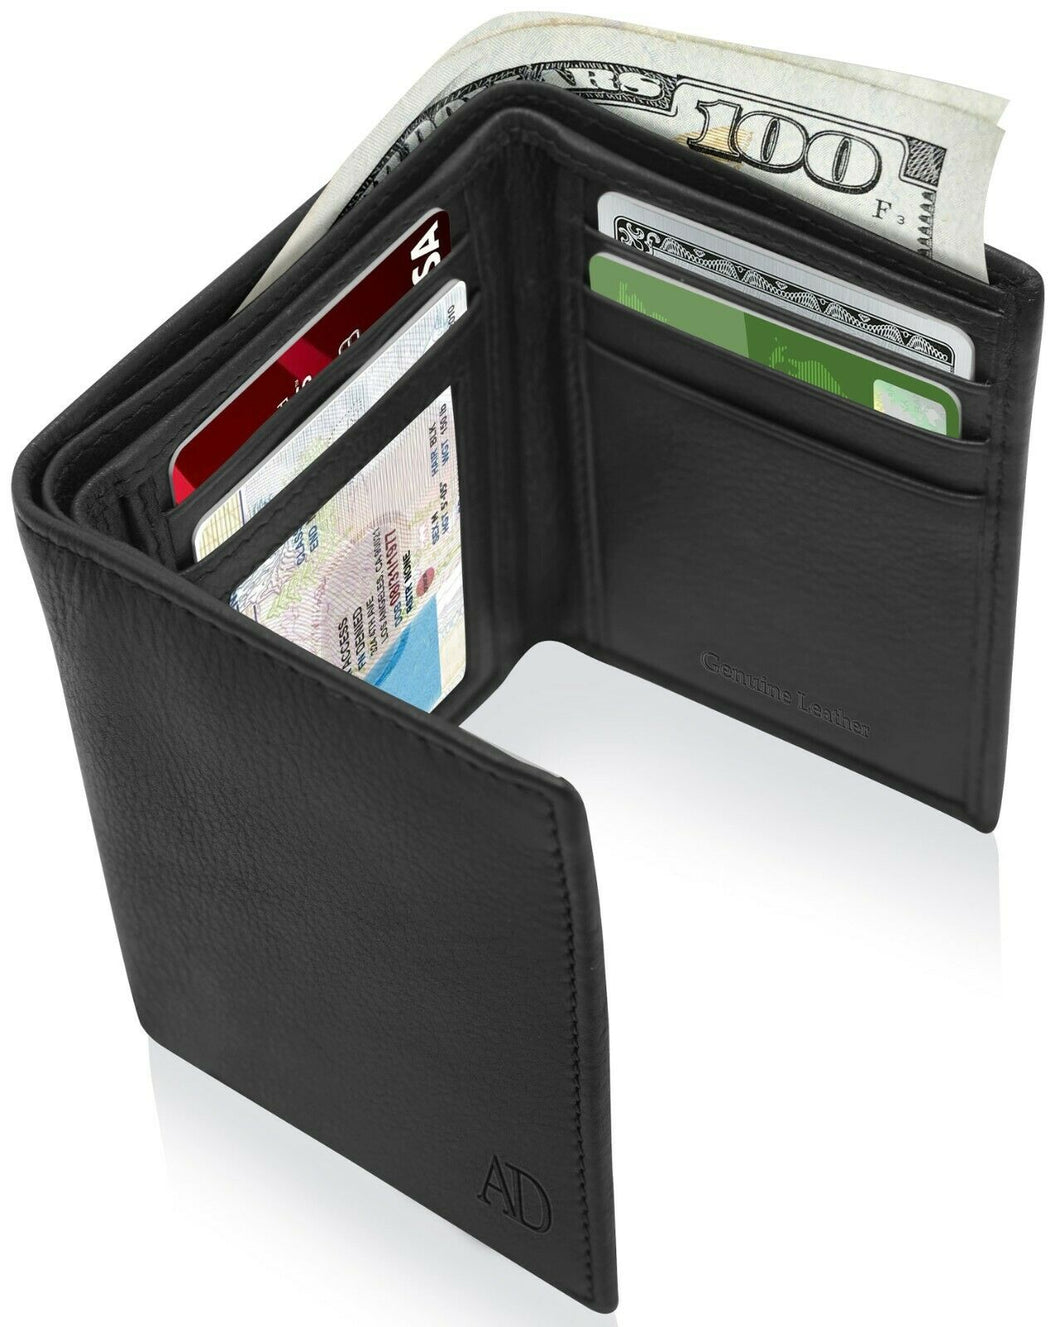 Real Leather Slim Wallets For Men Trifold Mens Wallet W/ ID Window RFID Blocking